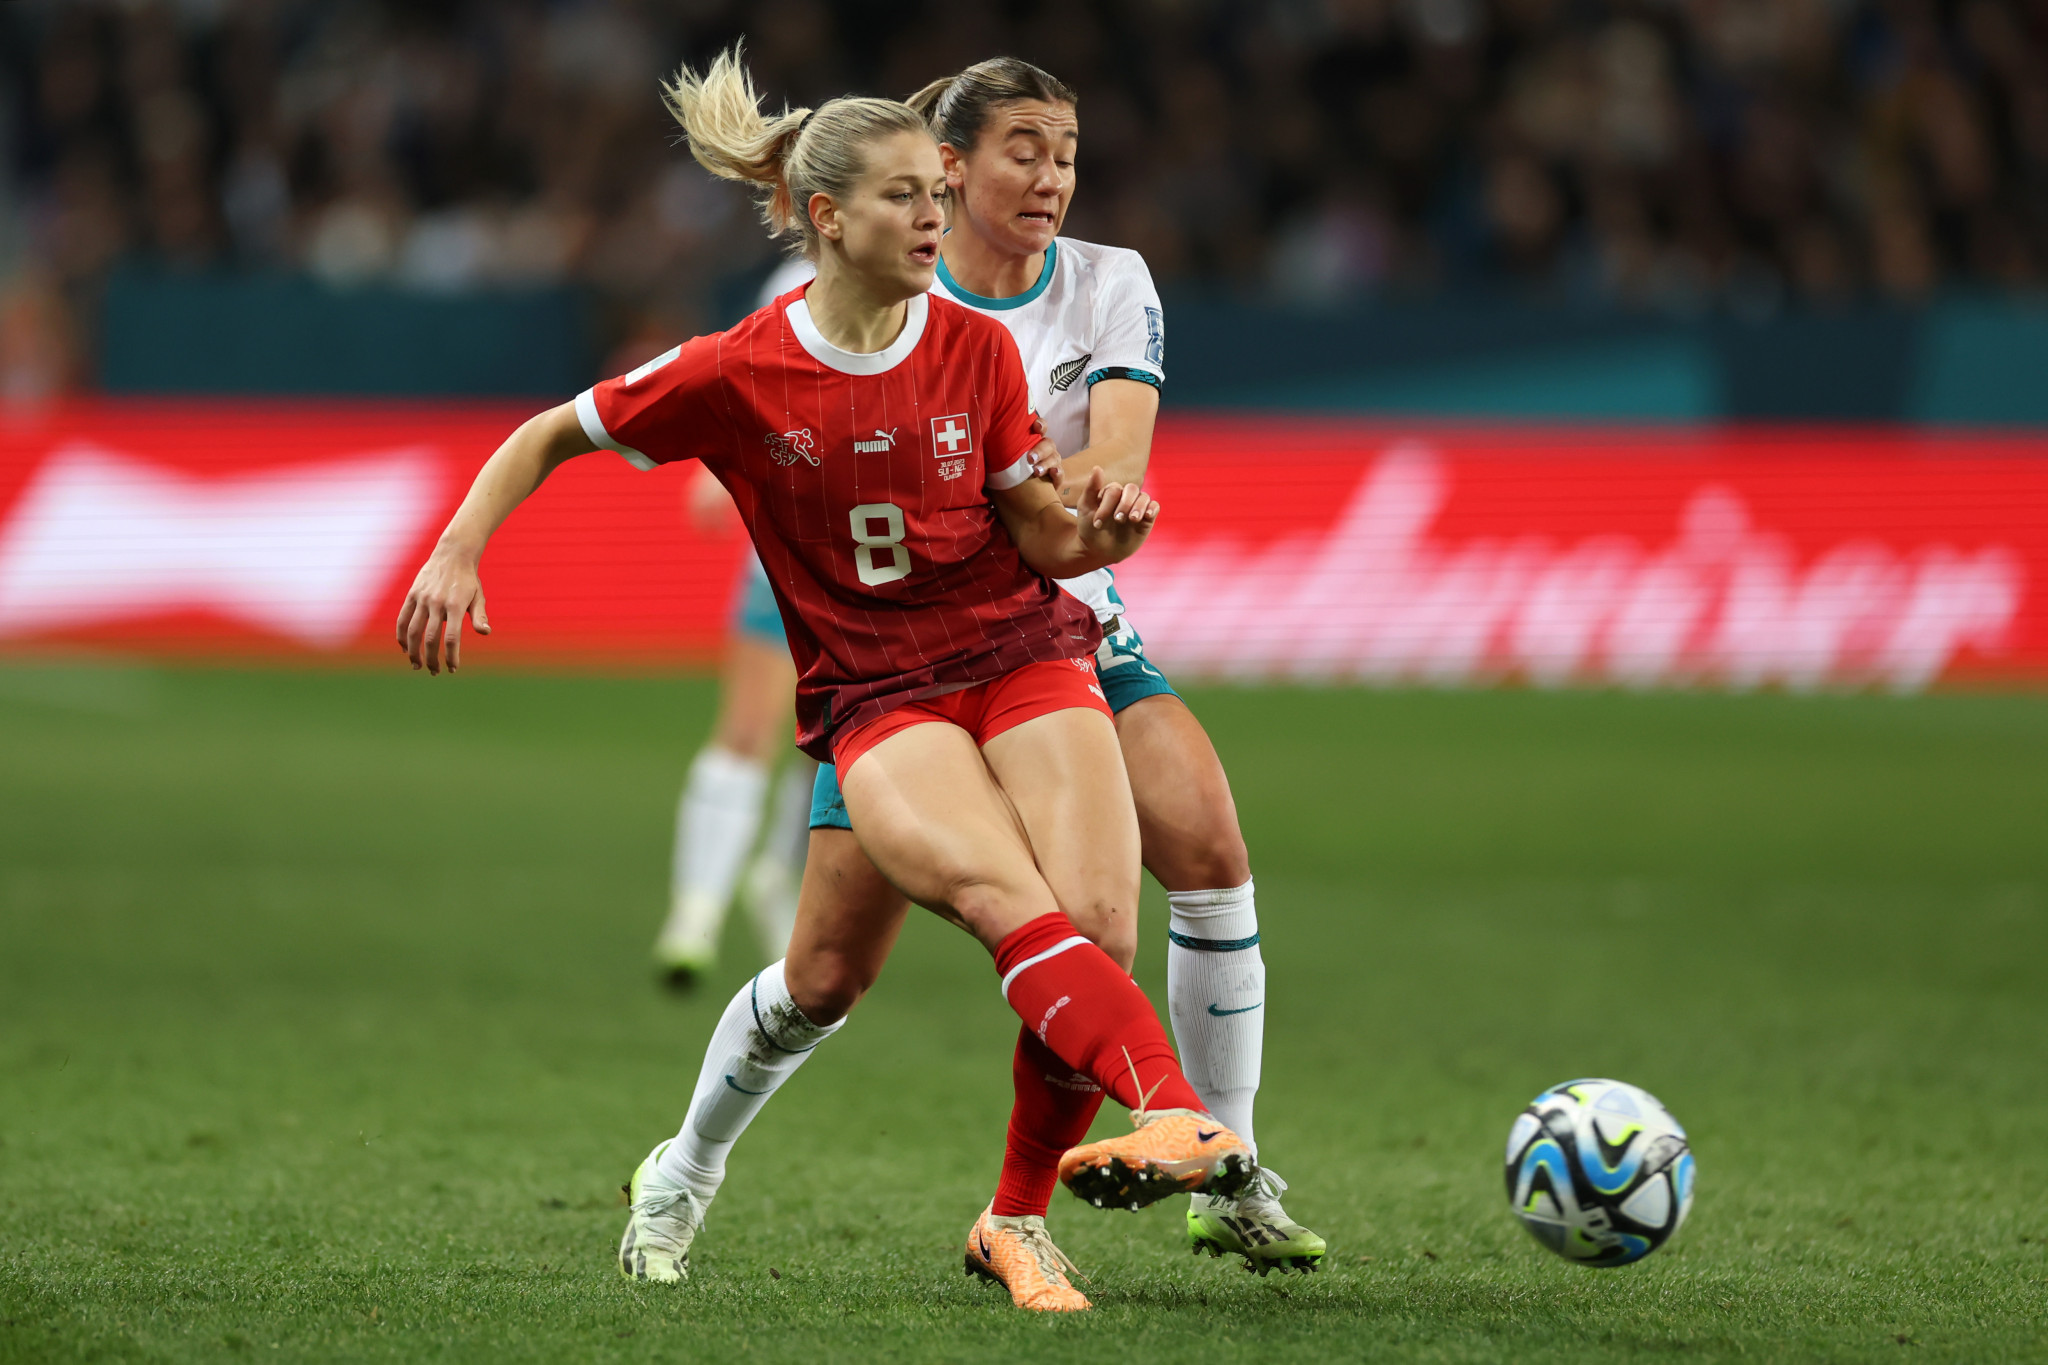 Switzerland, playing in red, earned a battling goalless draw against co-hosts New Zealand to finish top of Group A ©Getty Images